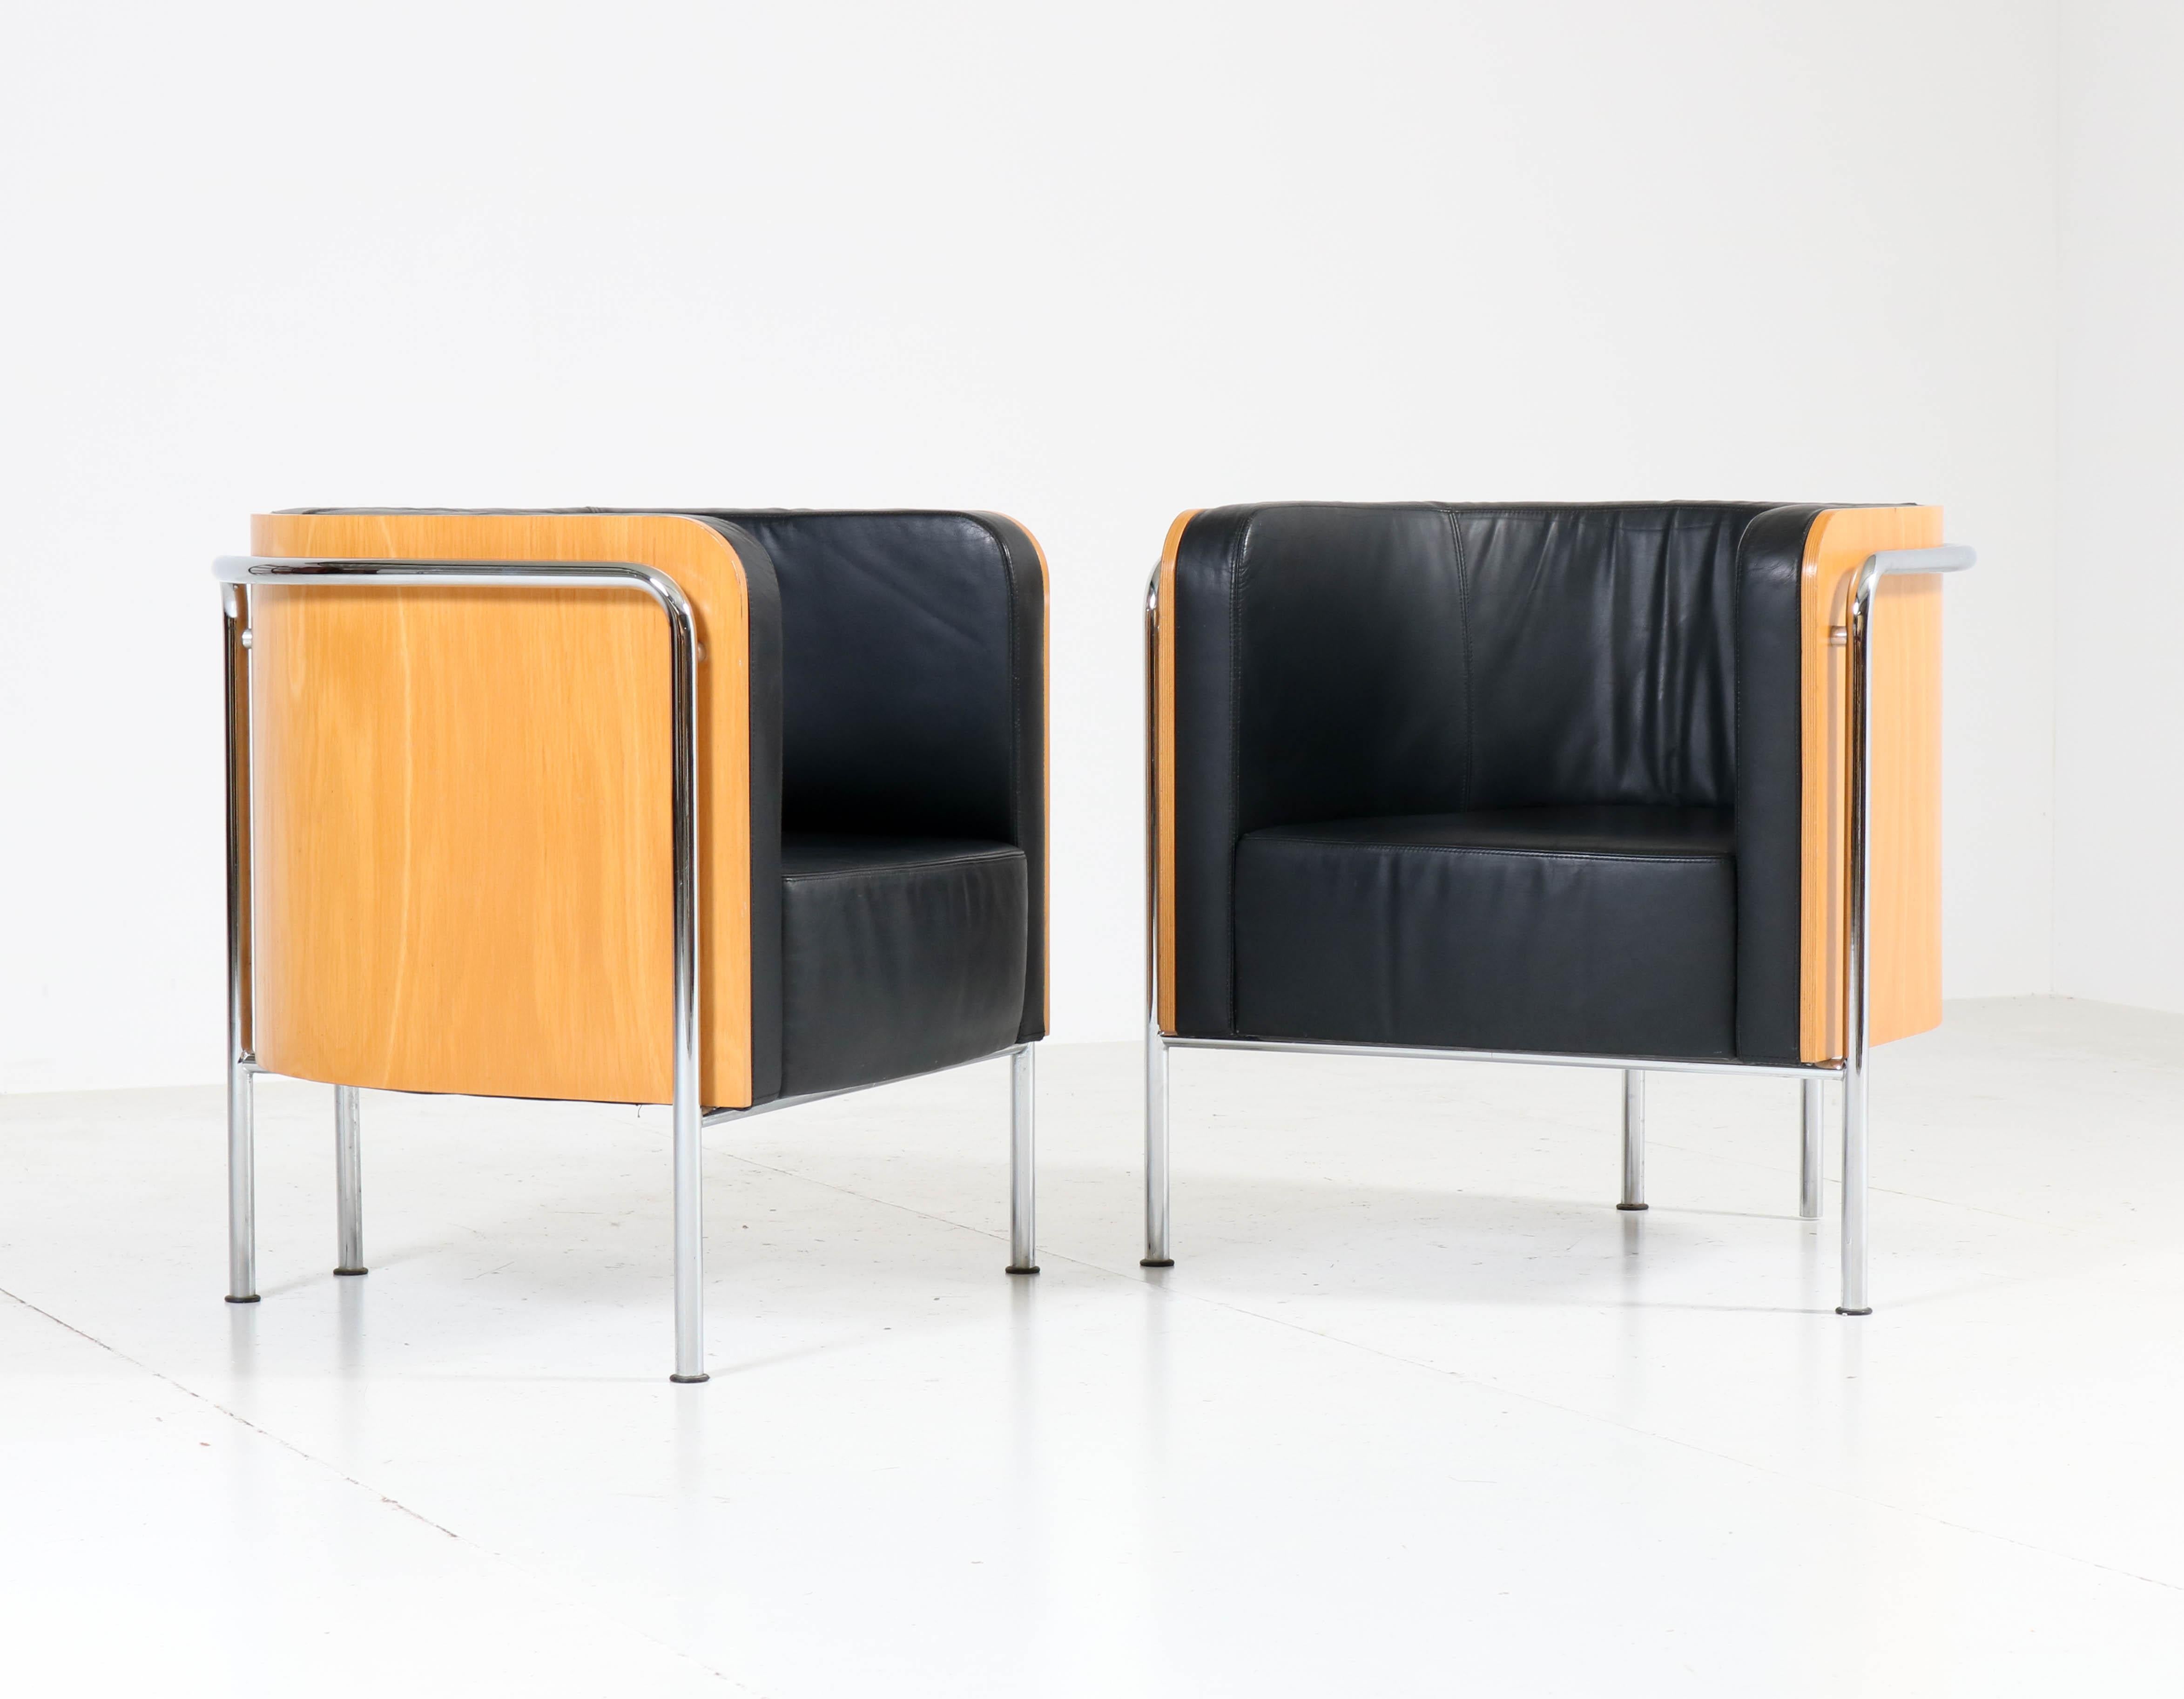 Wonderful and rare pair of vintage Bauhaus style club tub armchairs.
Designed by Thonet in 2000.
Only a few are made due to the 4500 Euro retail price of each chair!
Plywood and tubular chrome steel frame with black leather cushions.
Marked with